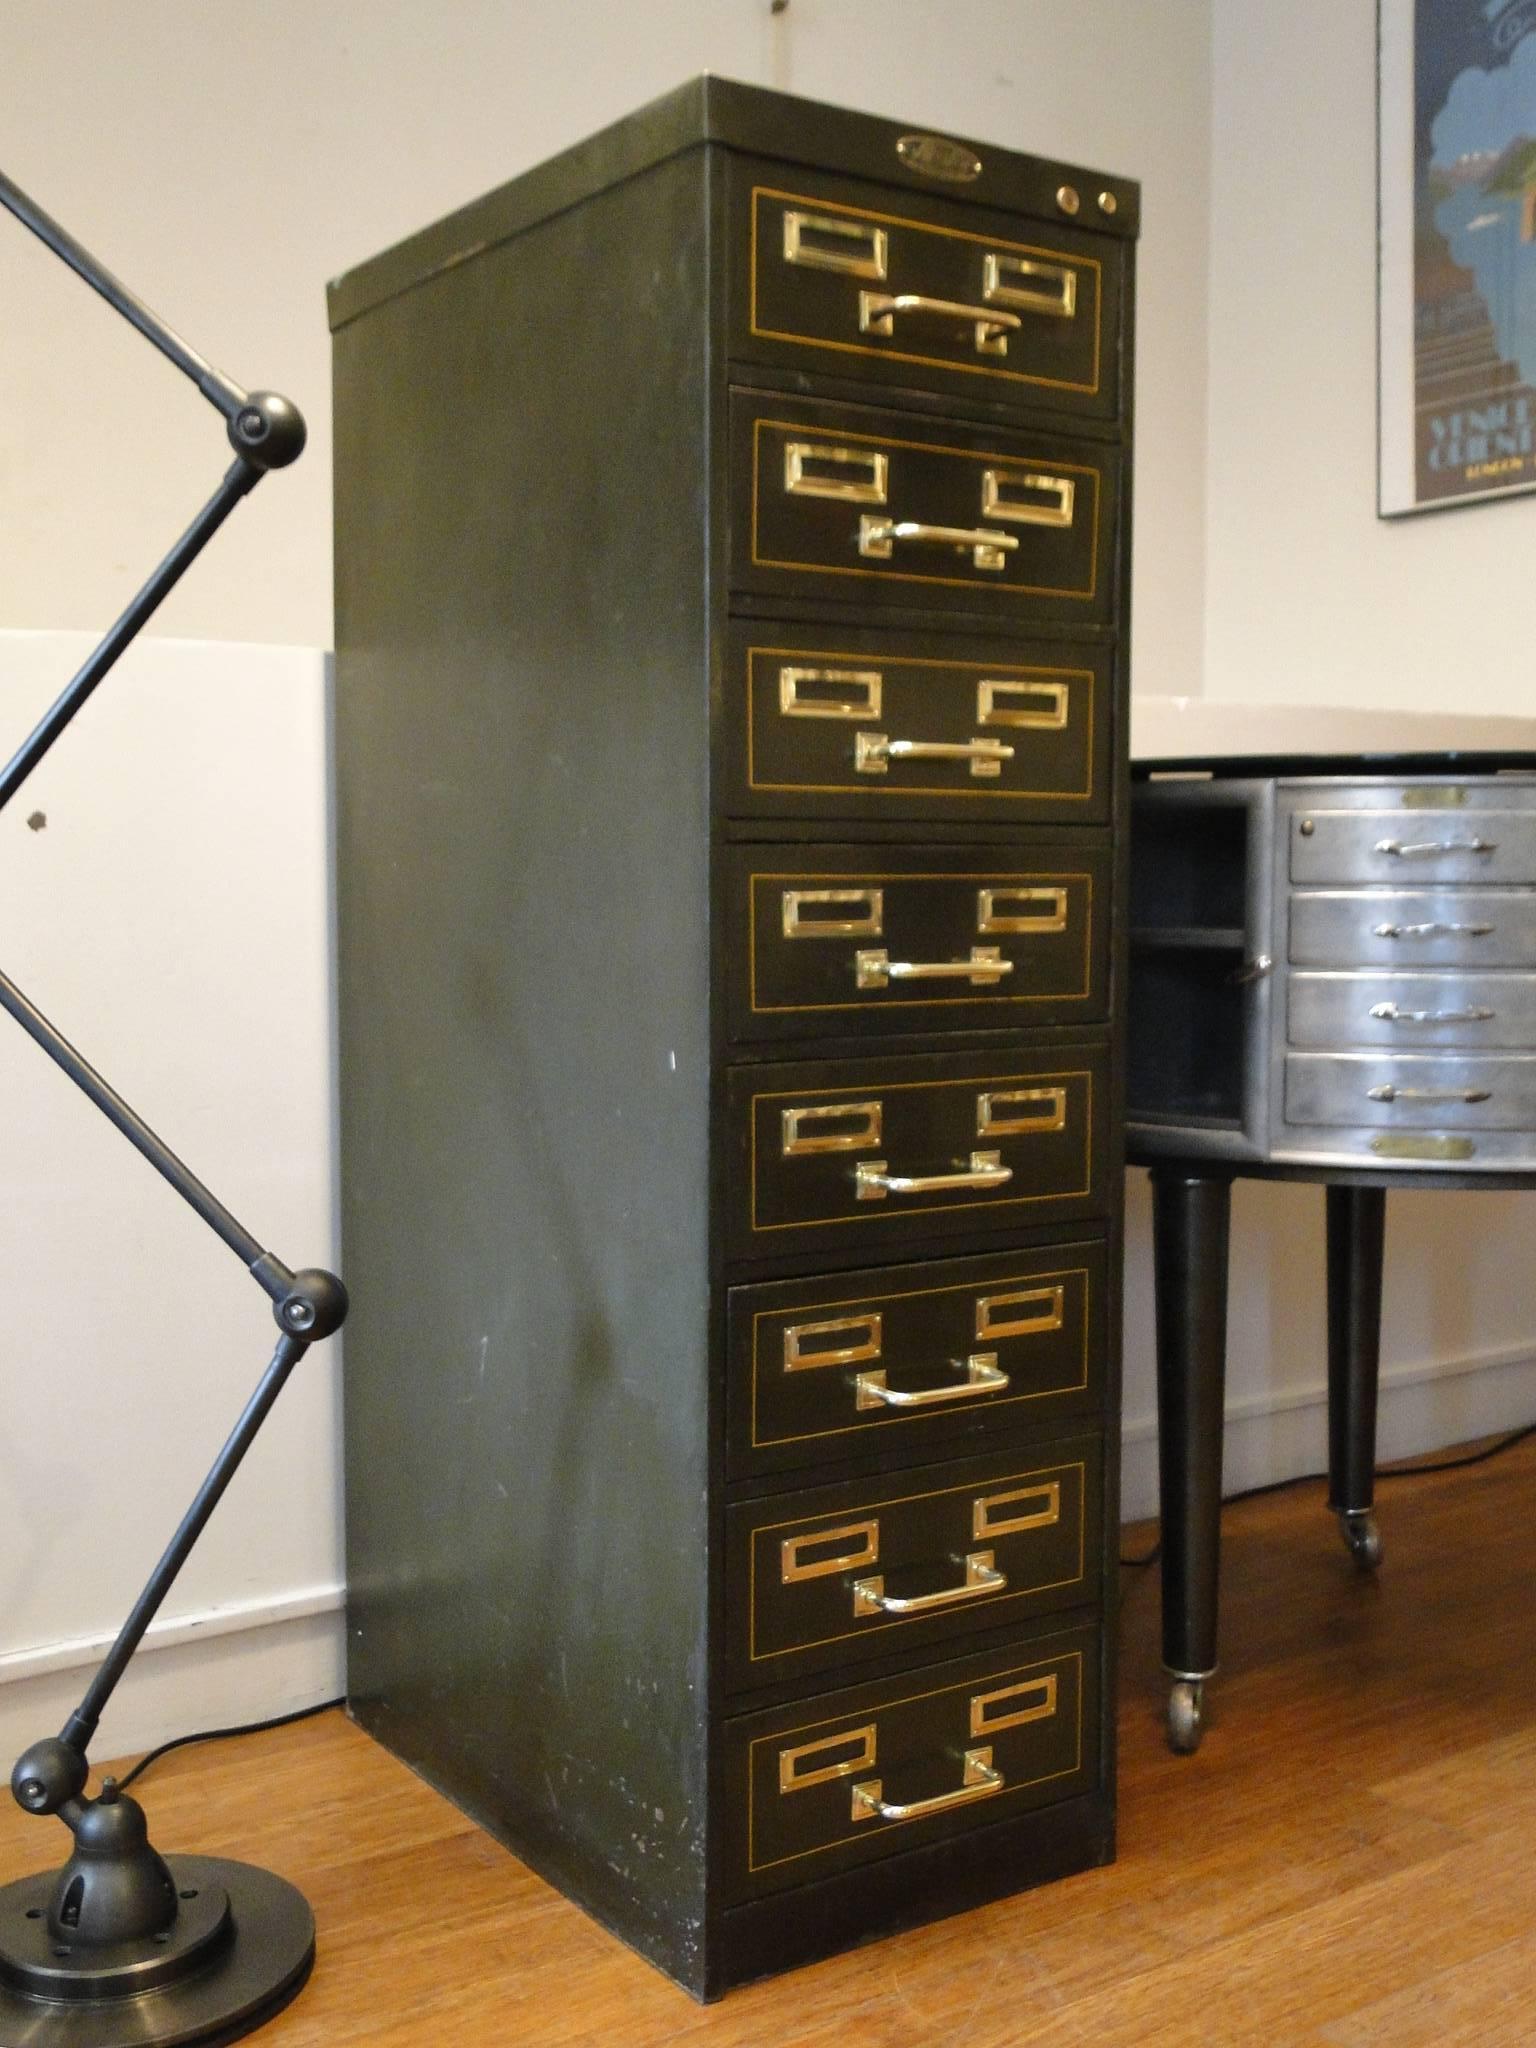 One of a kind metal case with eight drawers. A steel case furniture originating from the Industrial Revolution in French. Rare, in great functioning condition, featuring the original metal emblem of manufacture 